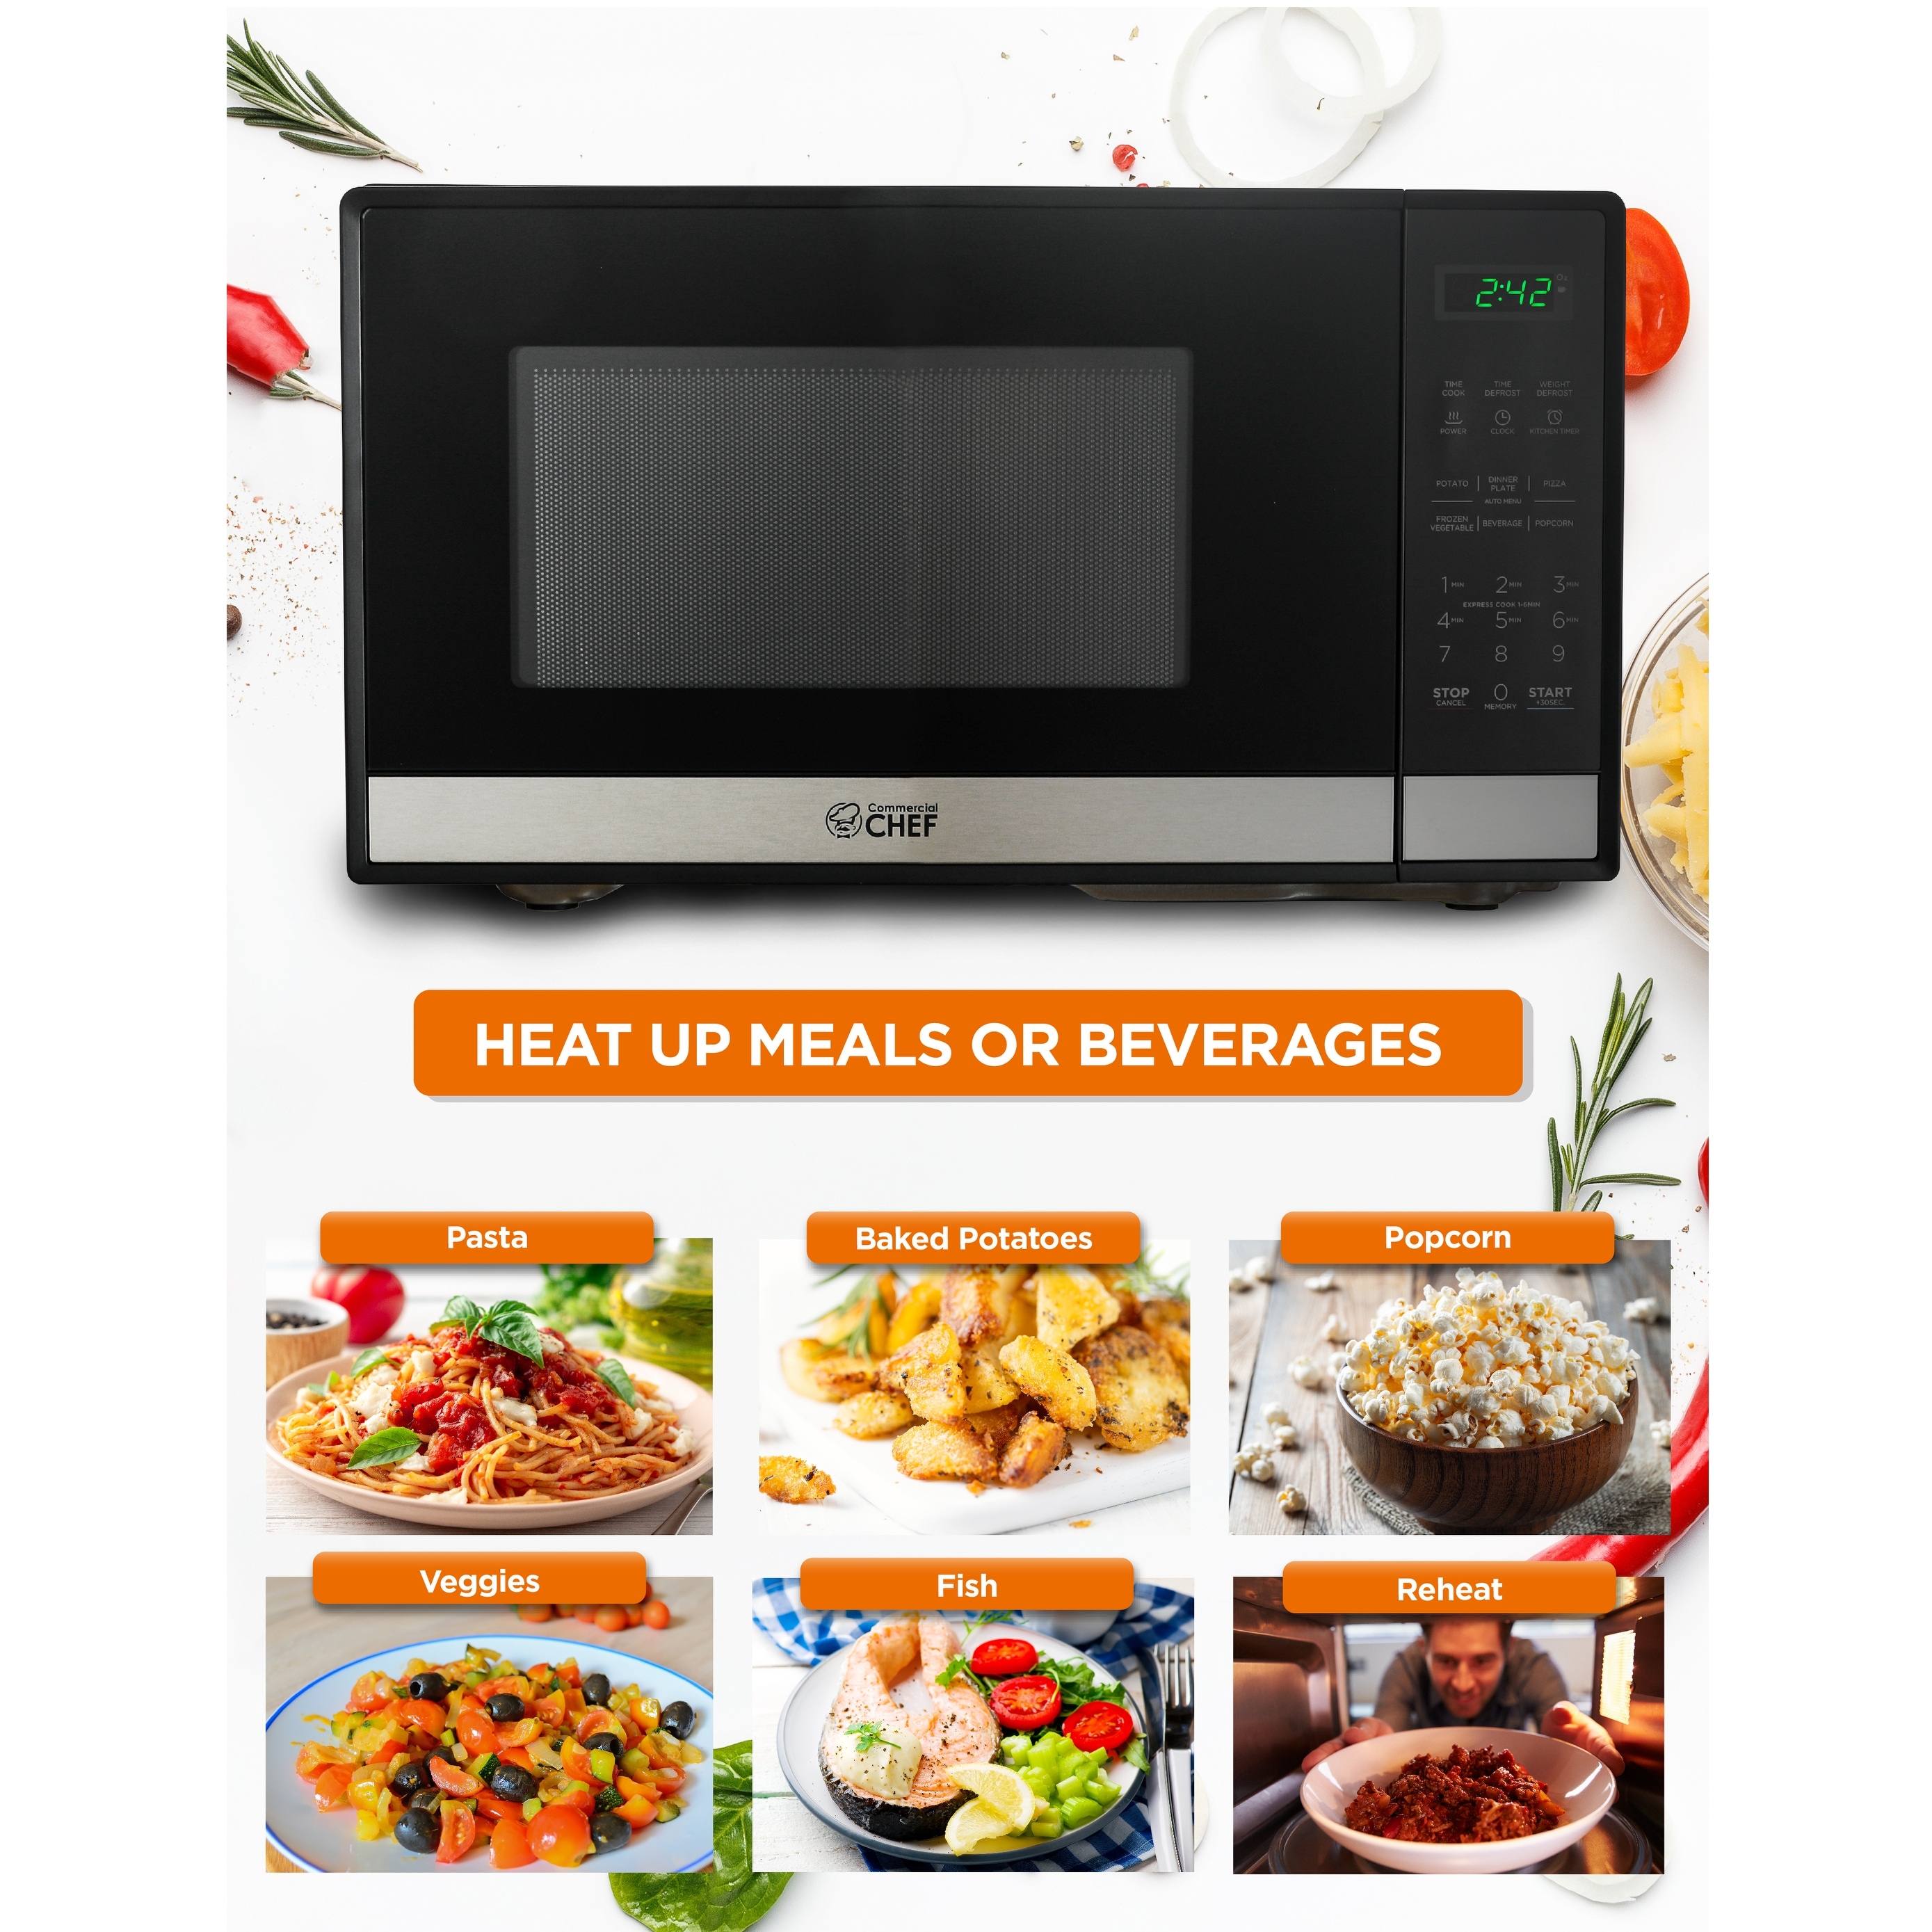 https://ak1.ostkcdn.com/images/products/is/images/direct/6caf0a2cff195778ca38cc04ba06482dacdfd95f/0.9-Cu.Ft-Countertop-Microwave-Oven-Stainless-Black.jpg